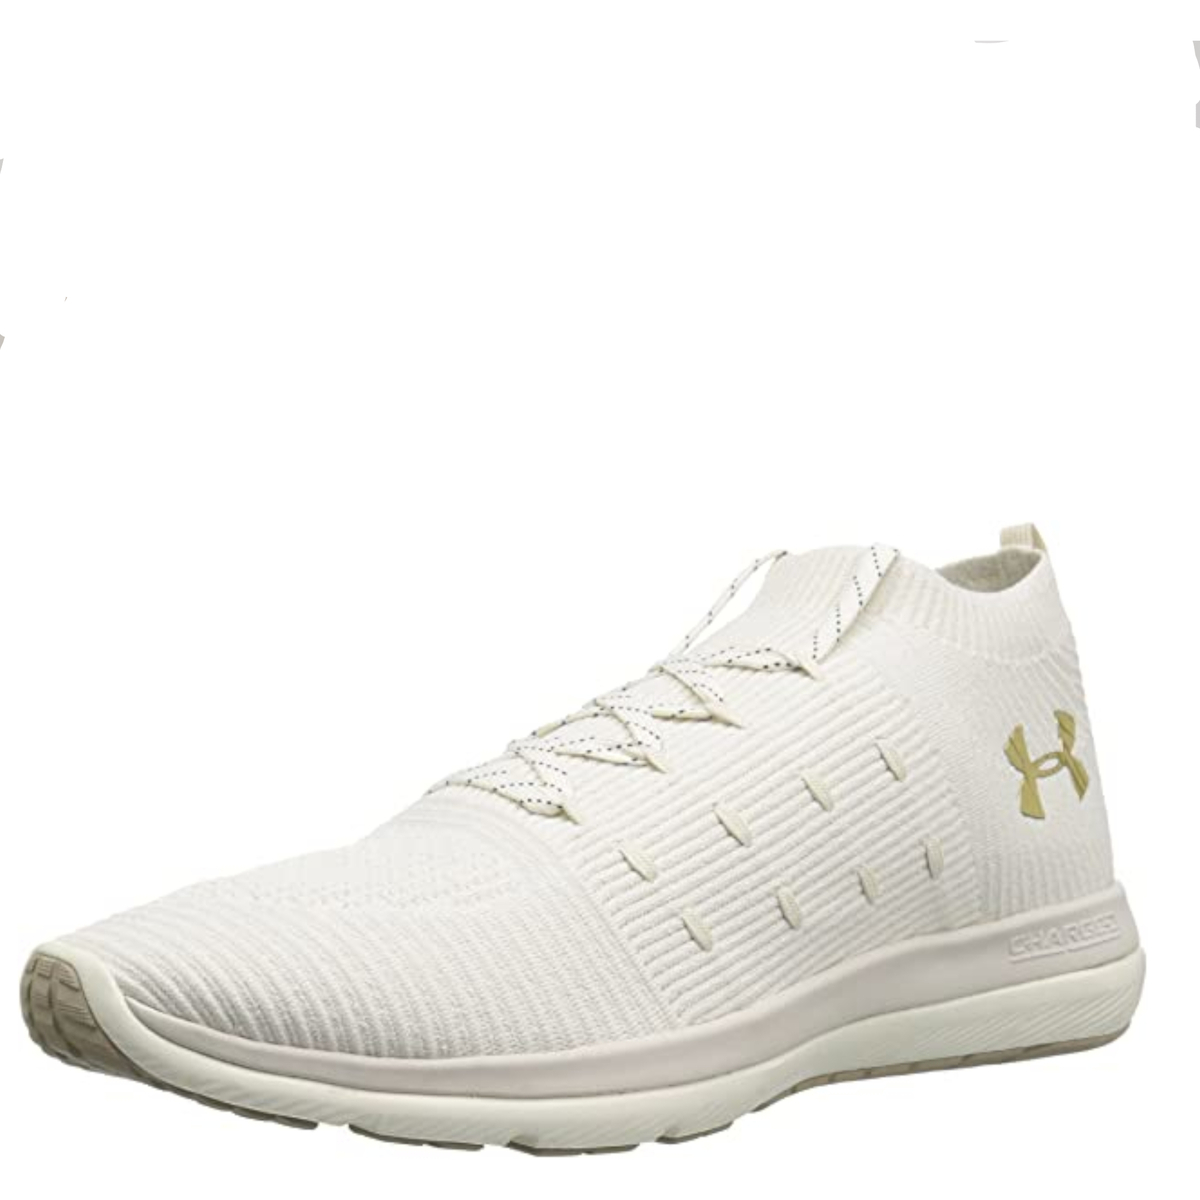 Chaussures Homme Under Armour 711 Under Armour 3019874 Blanc